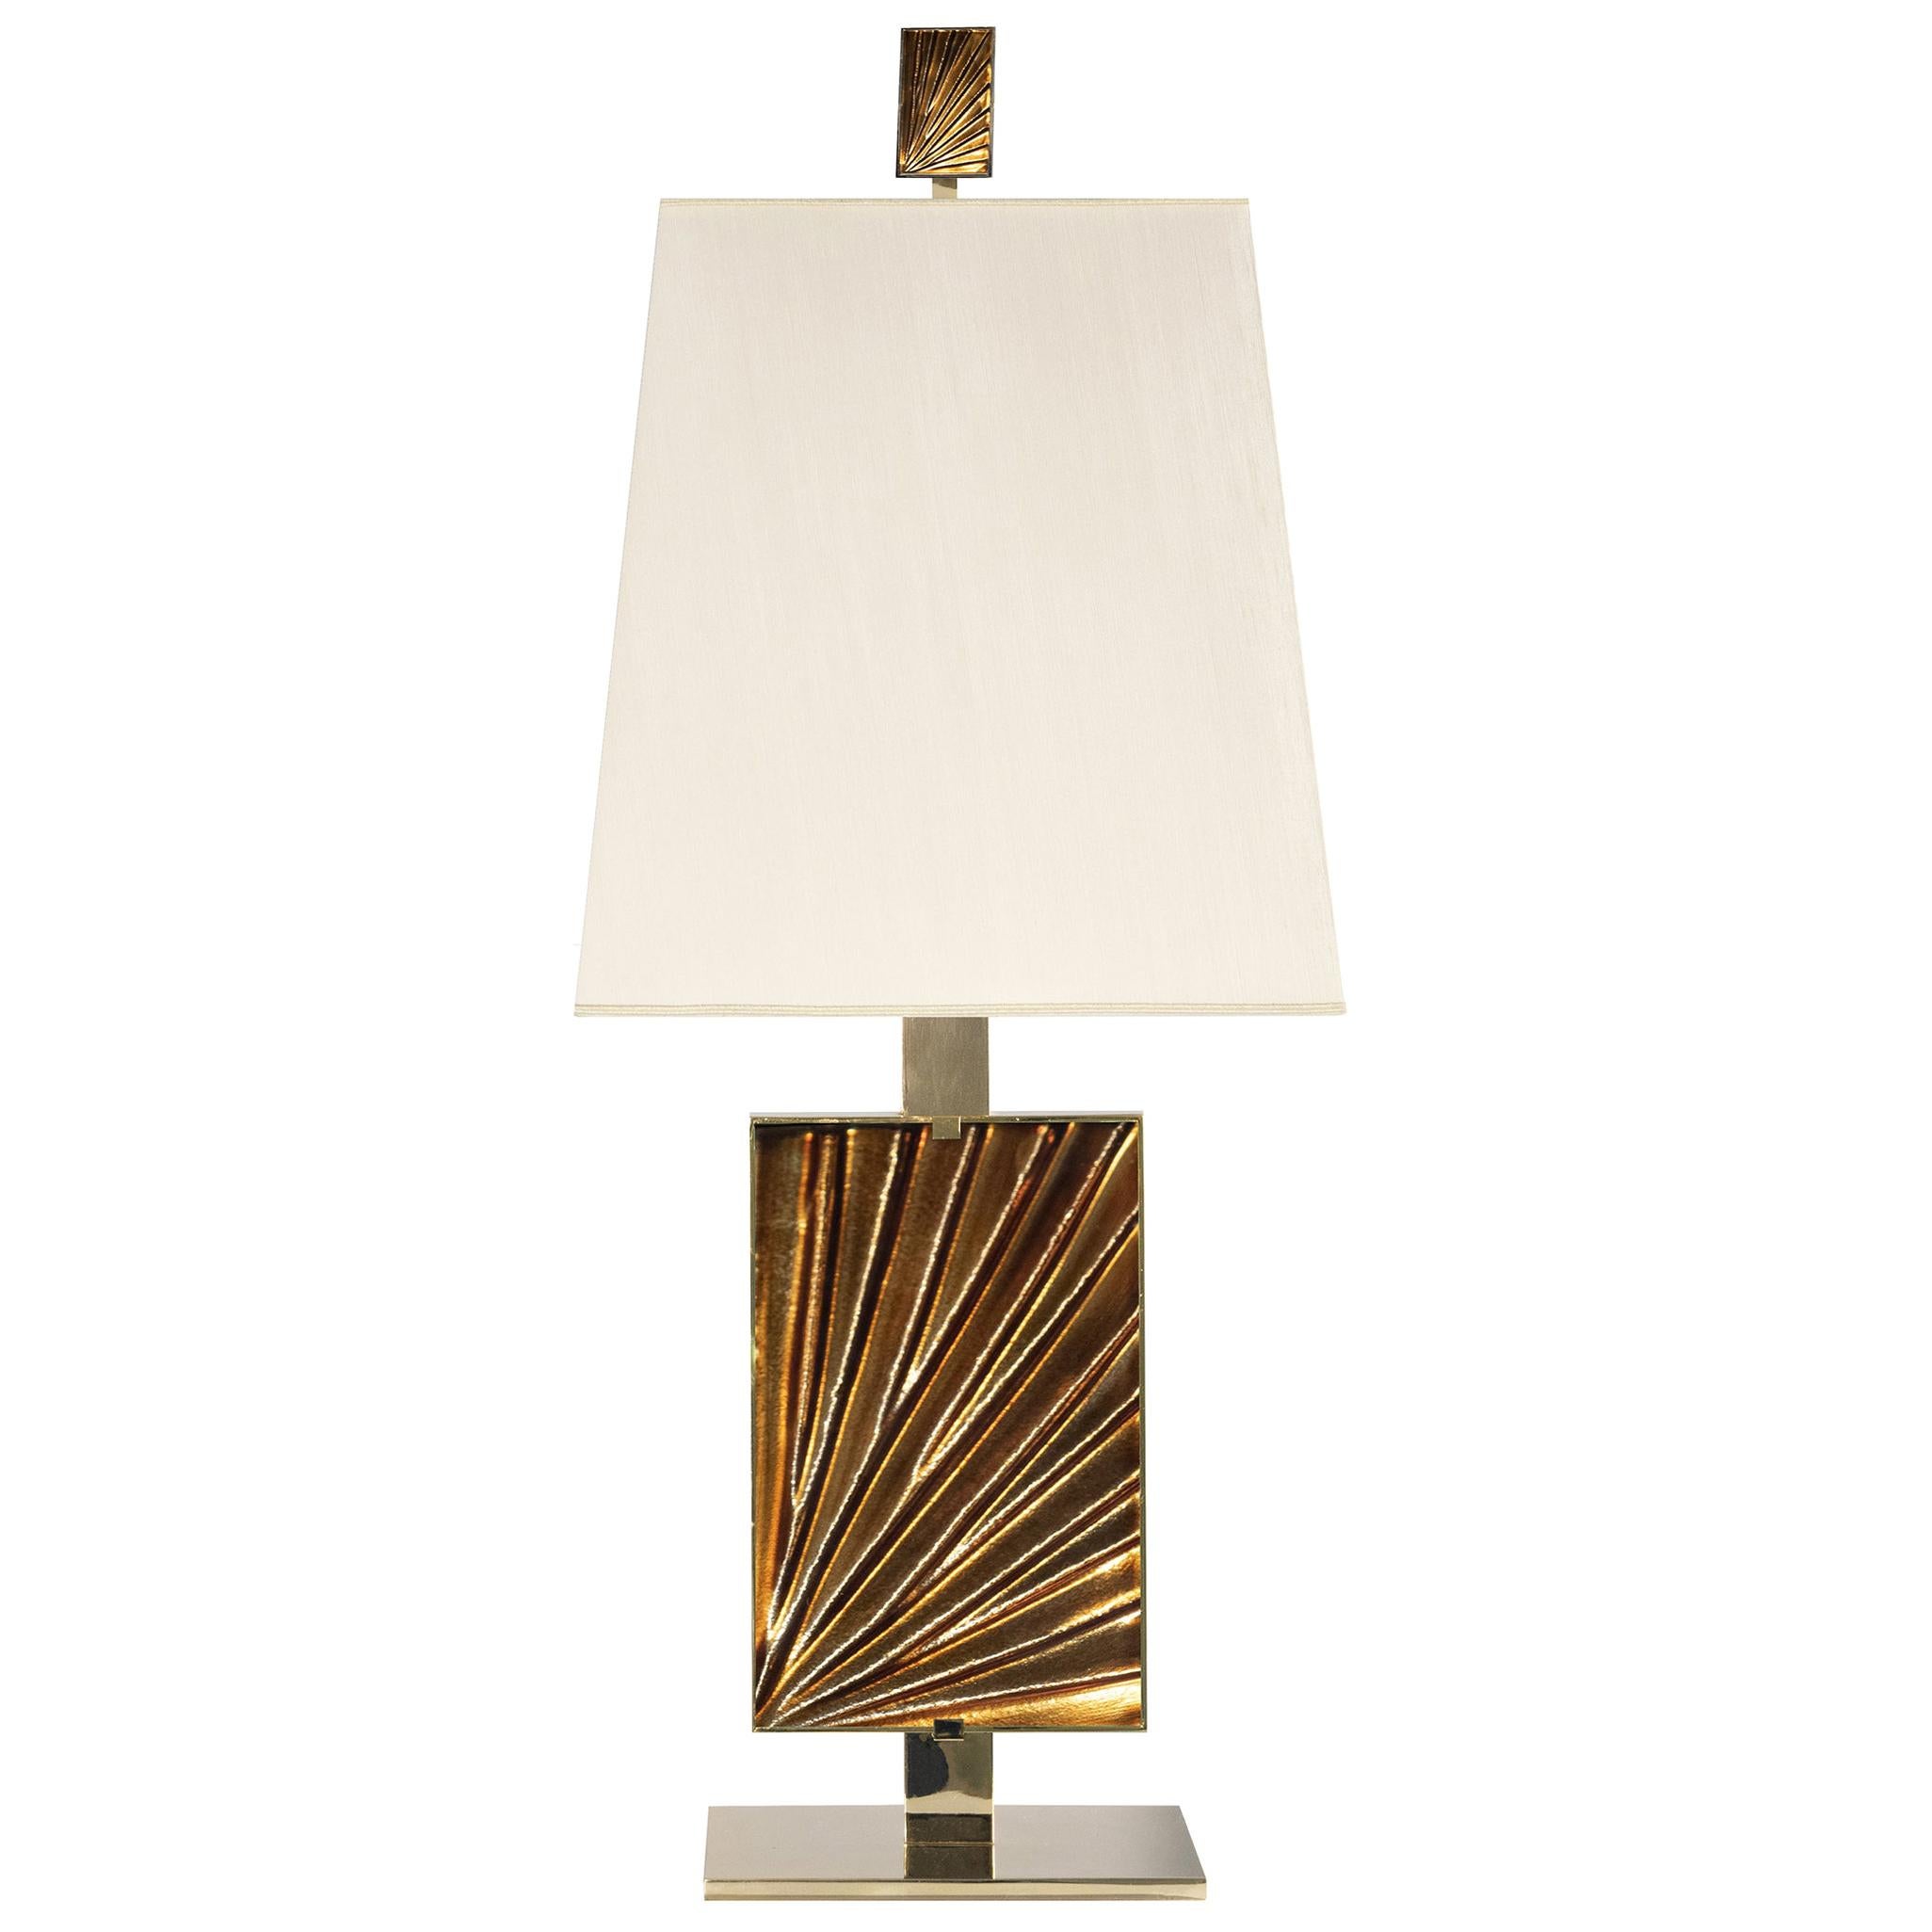 Contemporary 'Ambra' Table Lamp Amber Crystal, Brass and Gold by Ghirò Studio